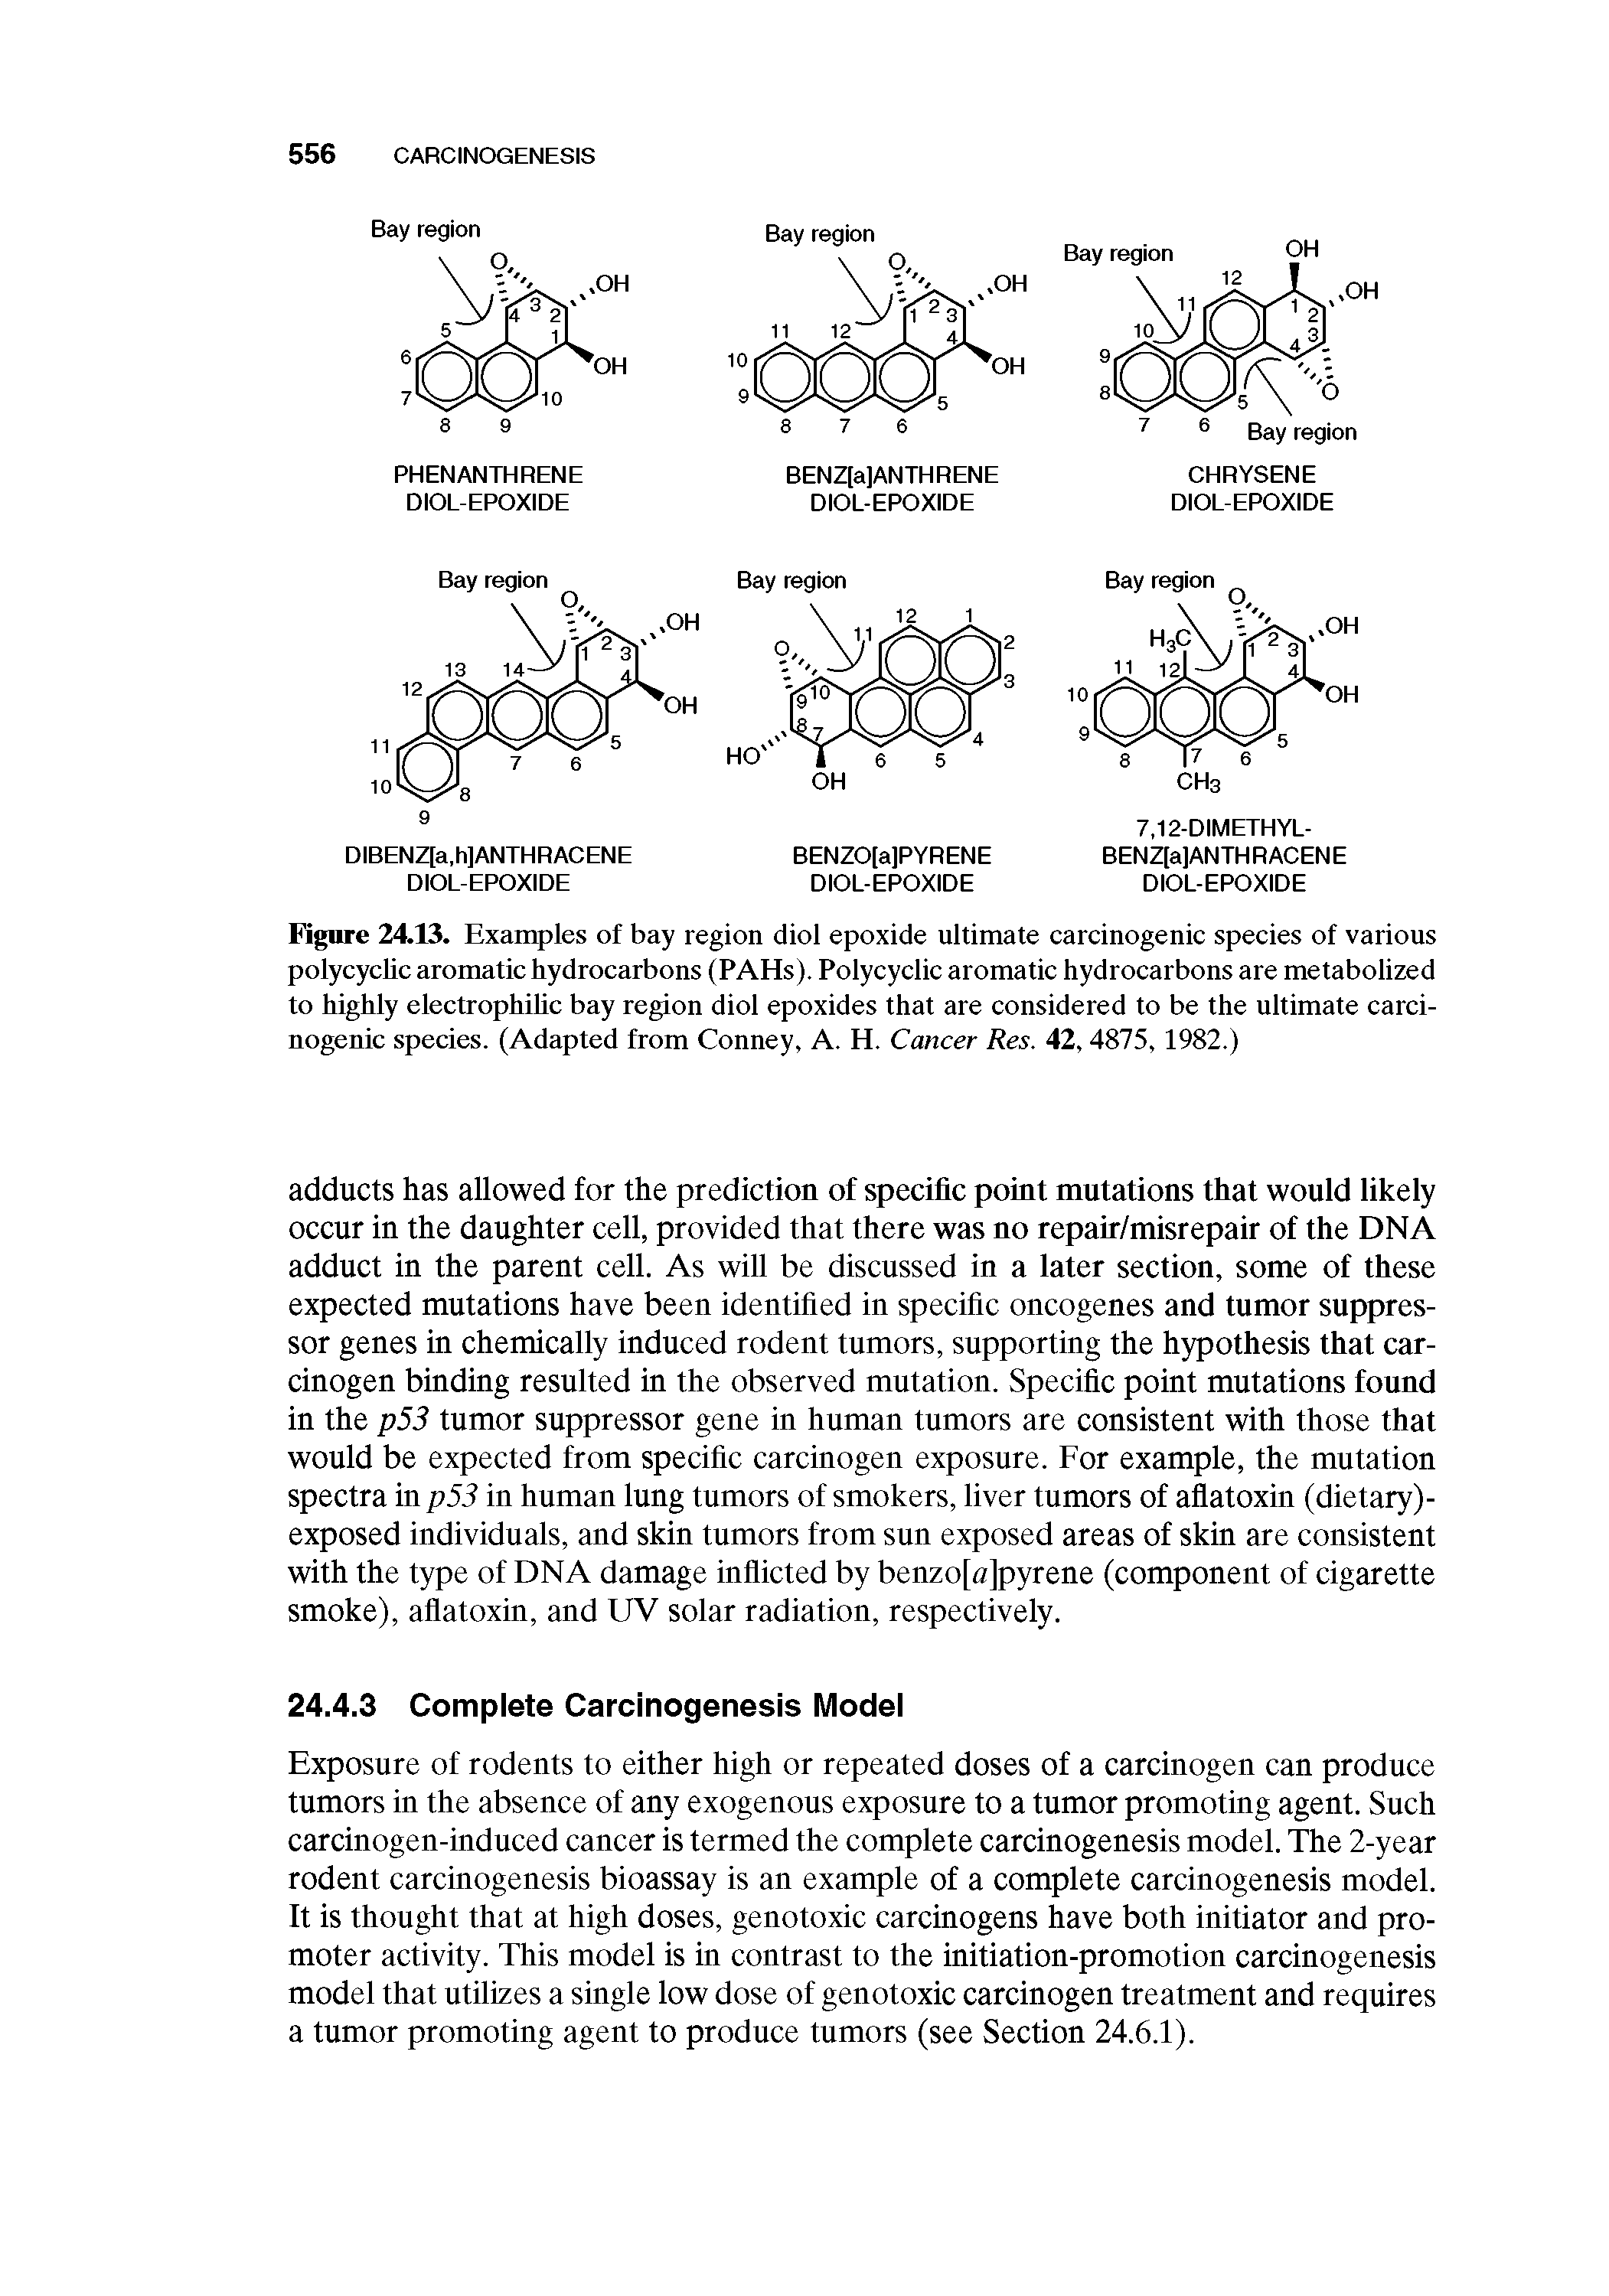 Figure 24.13. Examples of bay region diol epoxide ultimate carcinogenic species of various polycyclic aromatic hydrocarbons (PAHs). Polycyclic aromatic hydrocarbons are metabolized to highly electrophihc bay region diol epoxides that are considered to be the ultimate carcinogenic species. (Adapted from Conney, A. H. Cancer Res. 42, 4875, 1982.)...